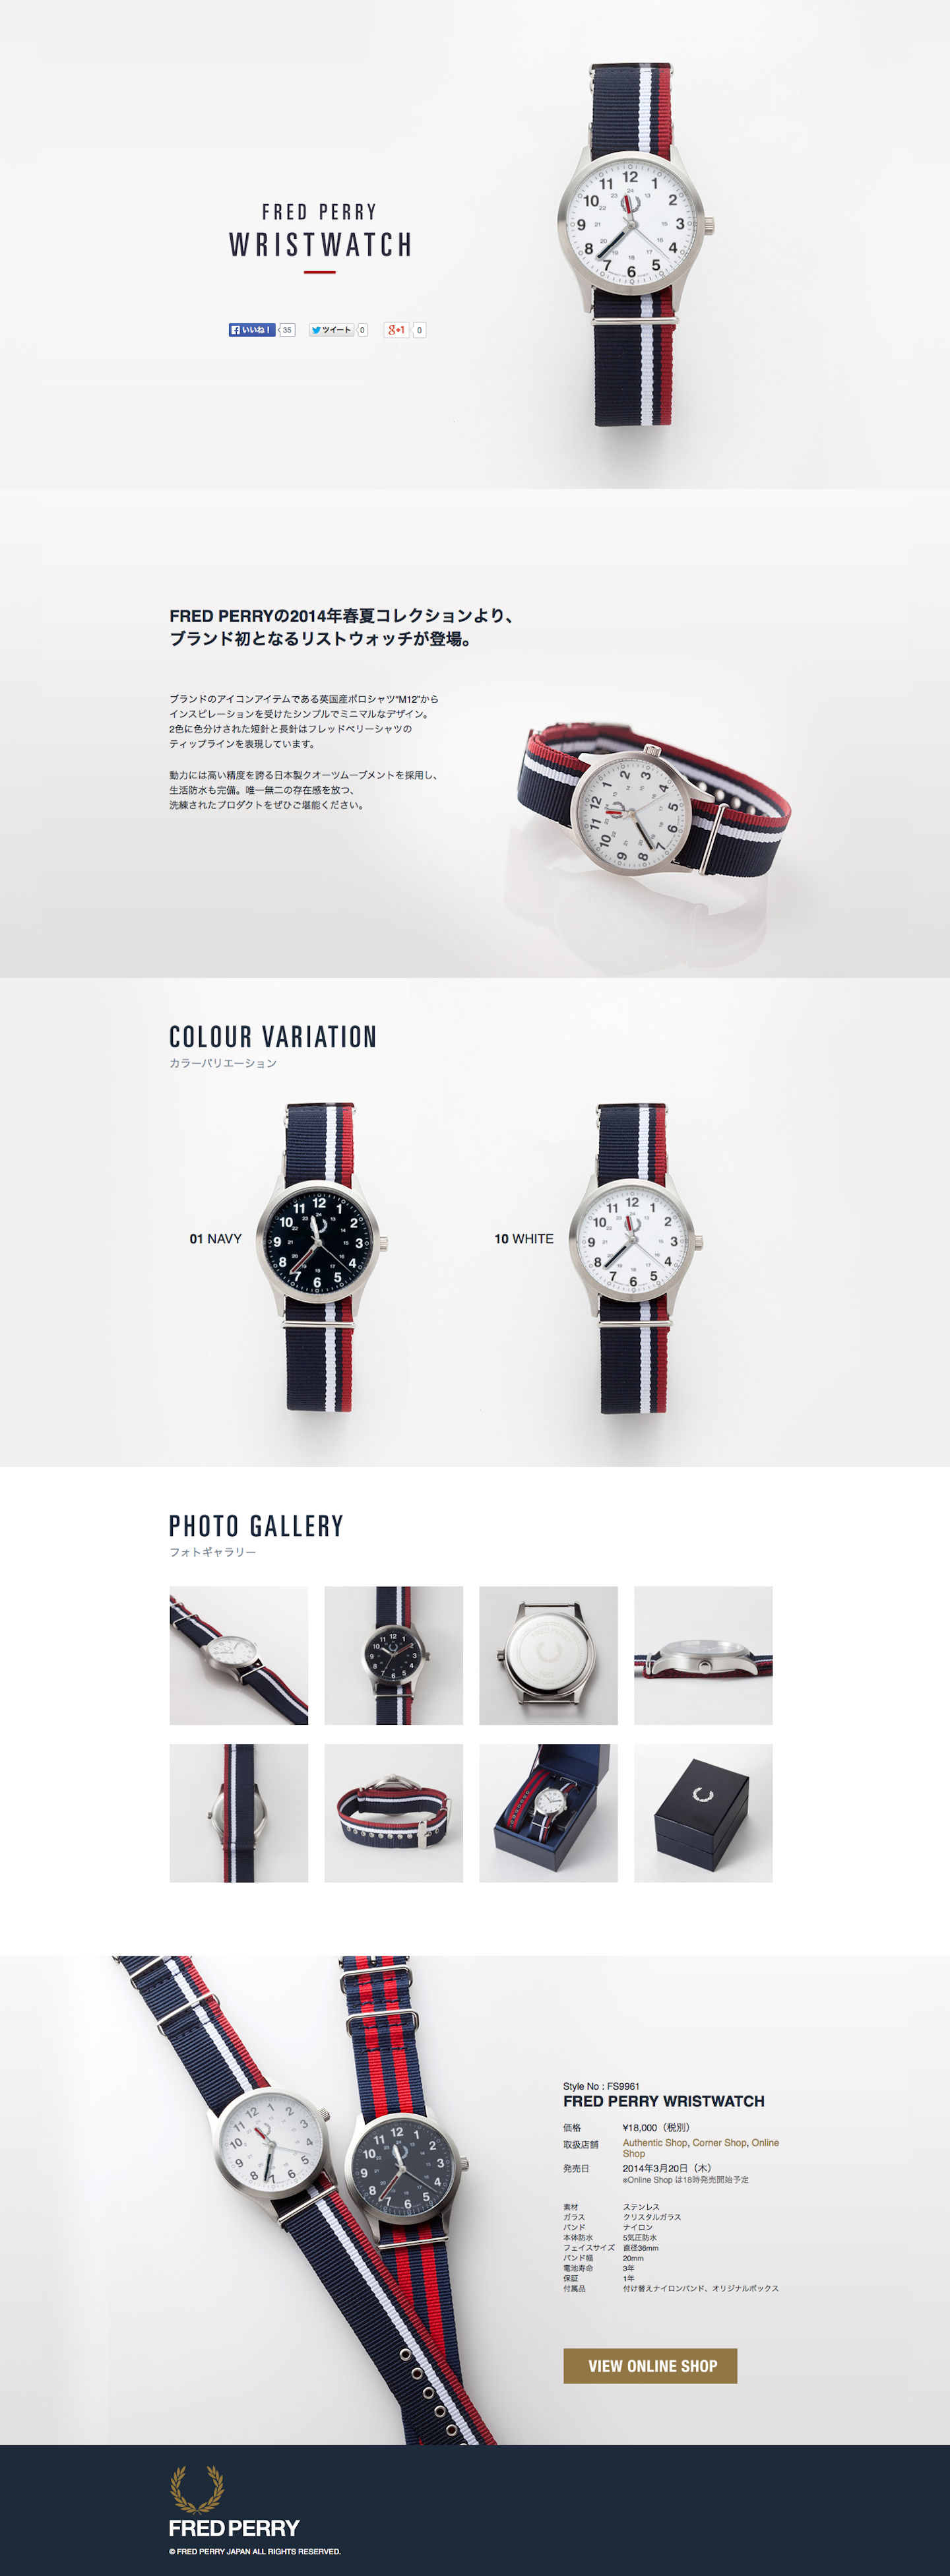 FRED PERRY WRISTWATCH FRED PERRY JAPAN フレッドペリー日本公式サイト